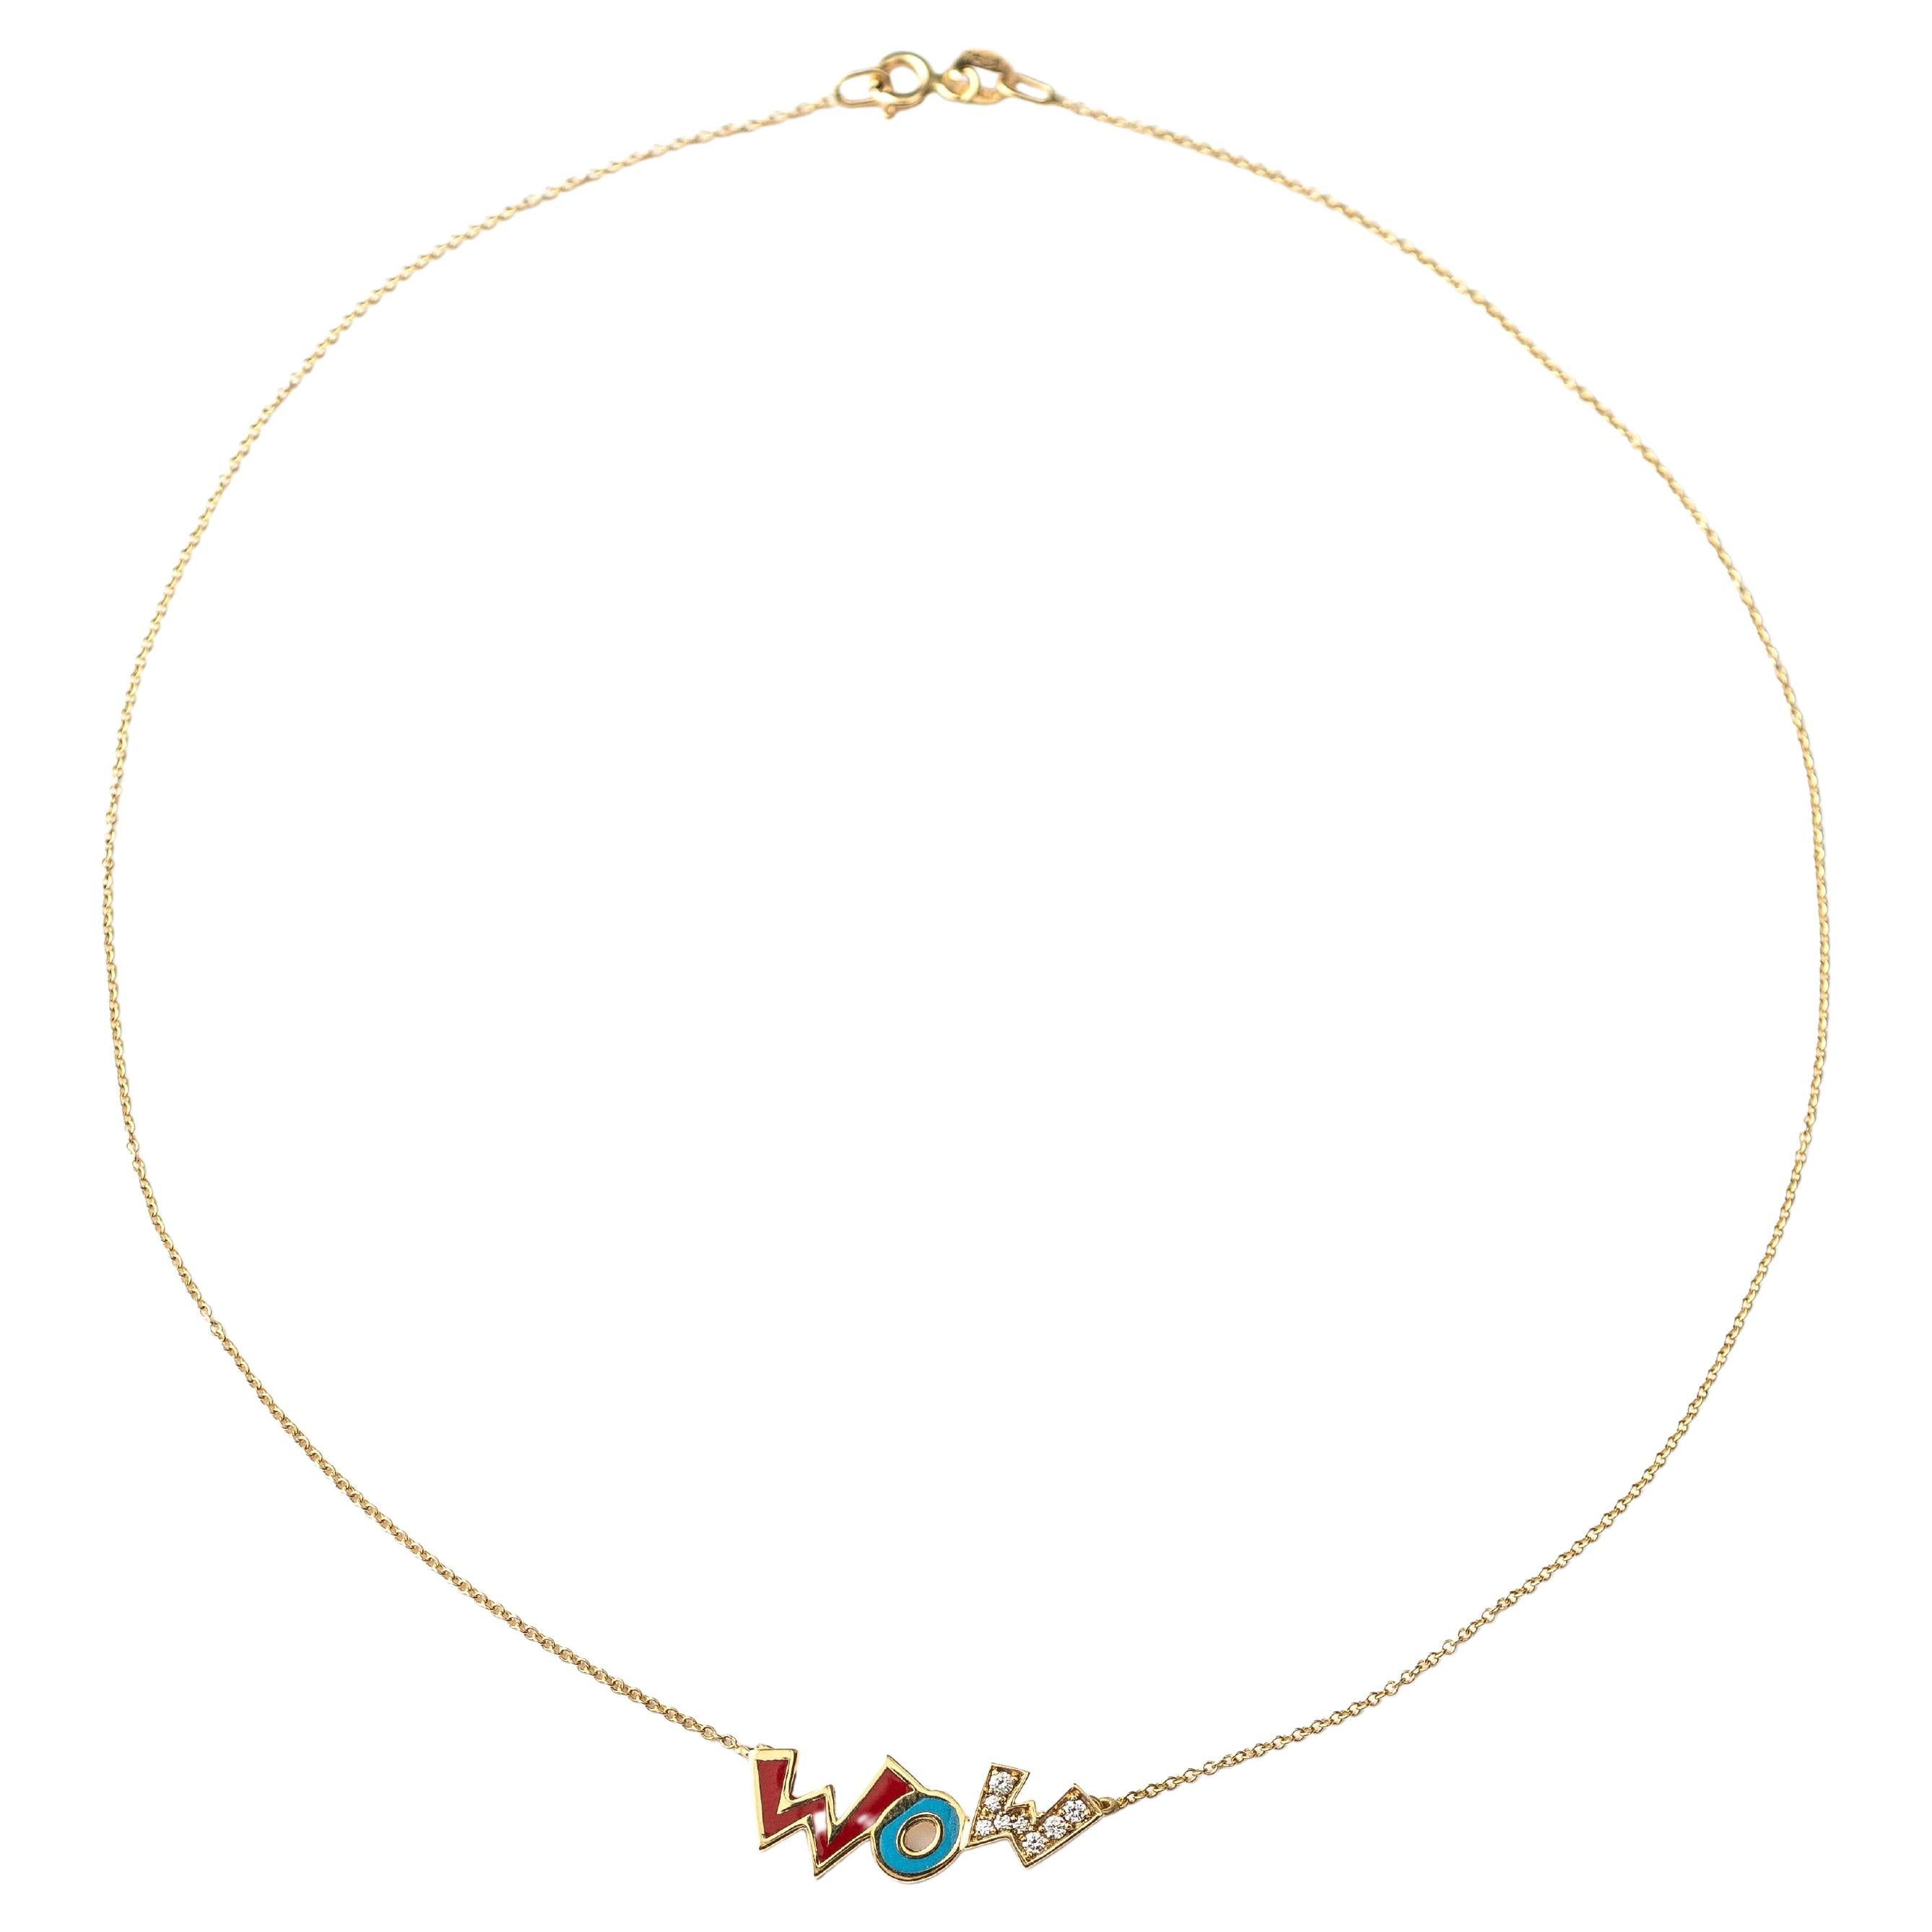 Maria Kotsoni Contemporary 18k Yellow Gold, red blue enamel diamond Wow Necklace For Sale